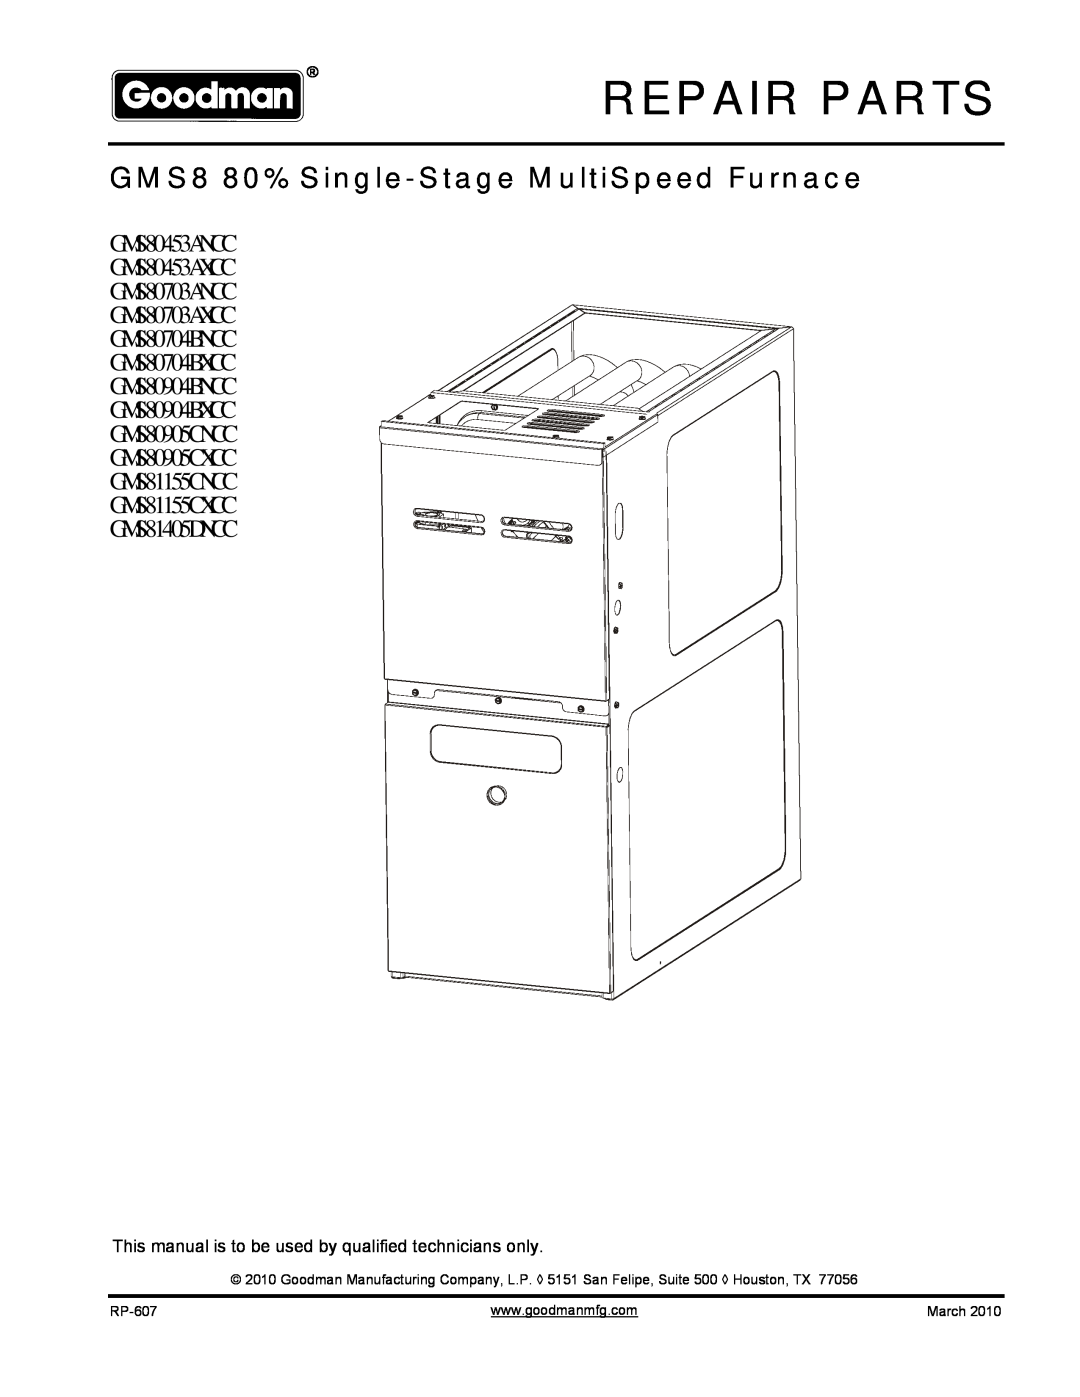 Goodman Mfg GMS81155CXCC, GMS81405DNCC manual Repair Parts, GMS8 80% Single-Stage MultiSpeed Furnace, RP-607, March 